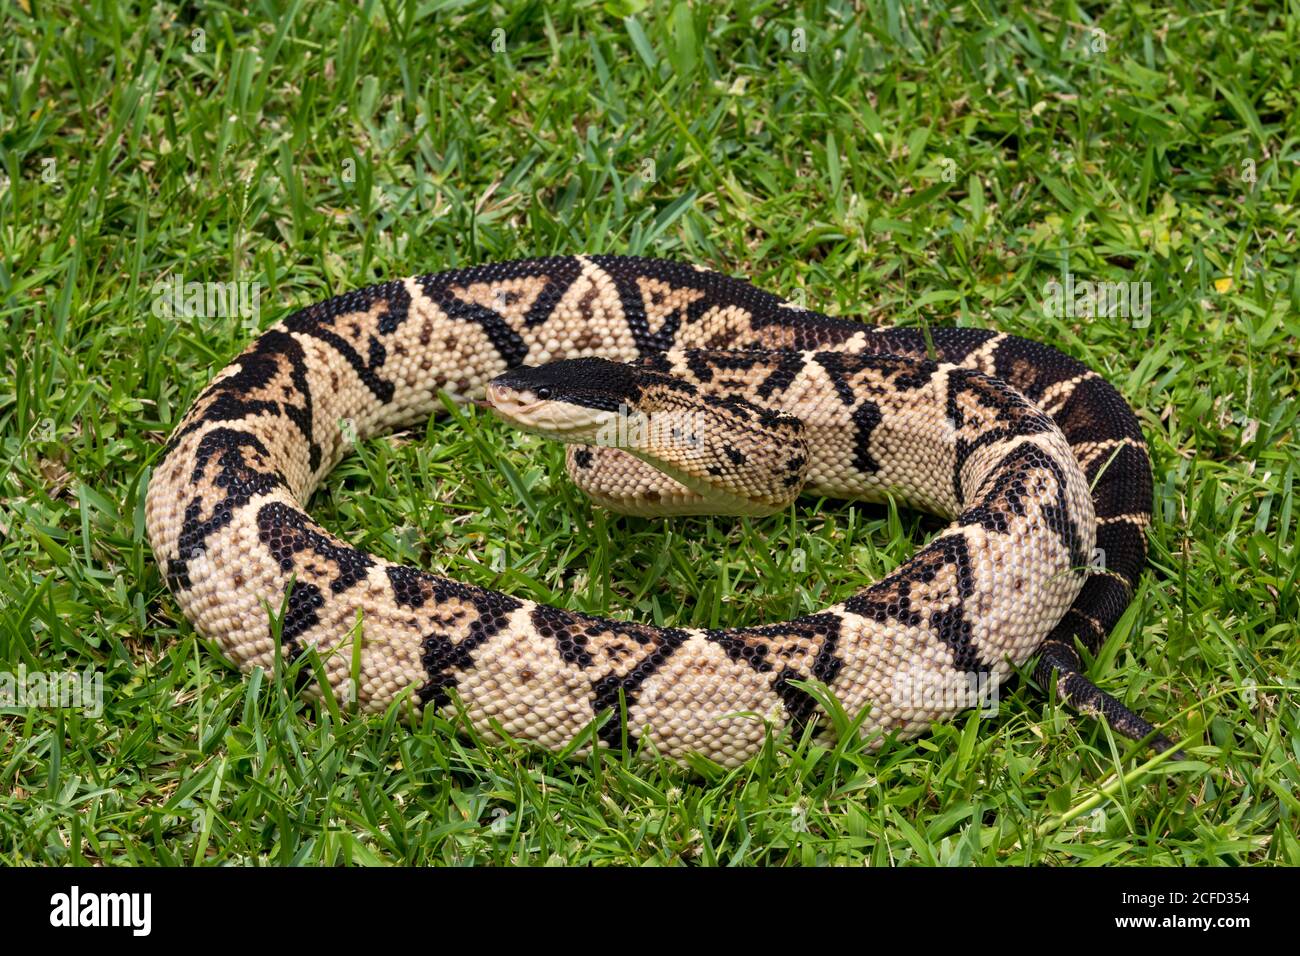 Black-headed bushmaster, Lachesis melanocephala is the largest poisonous snake in Costa Rica and endemic to the country, found only in the southern pa Stock Photo